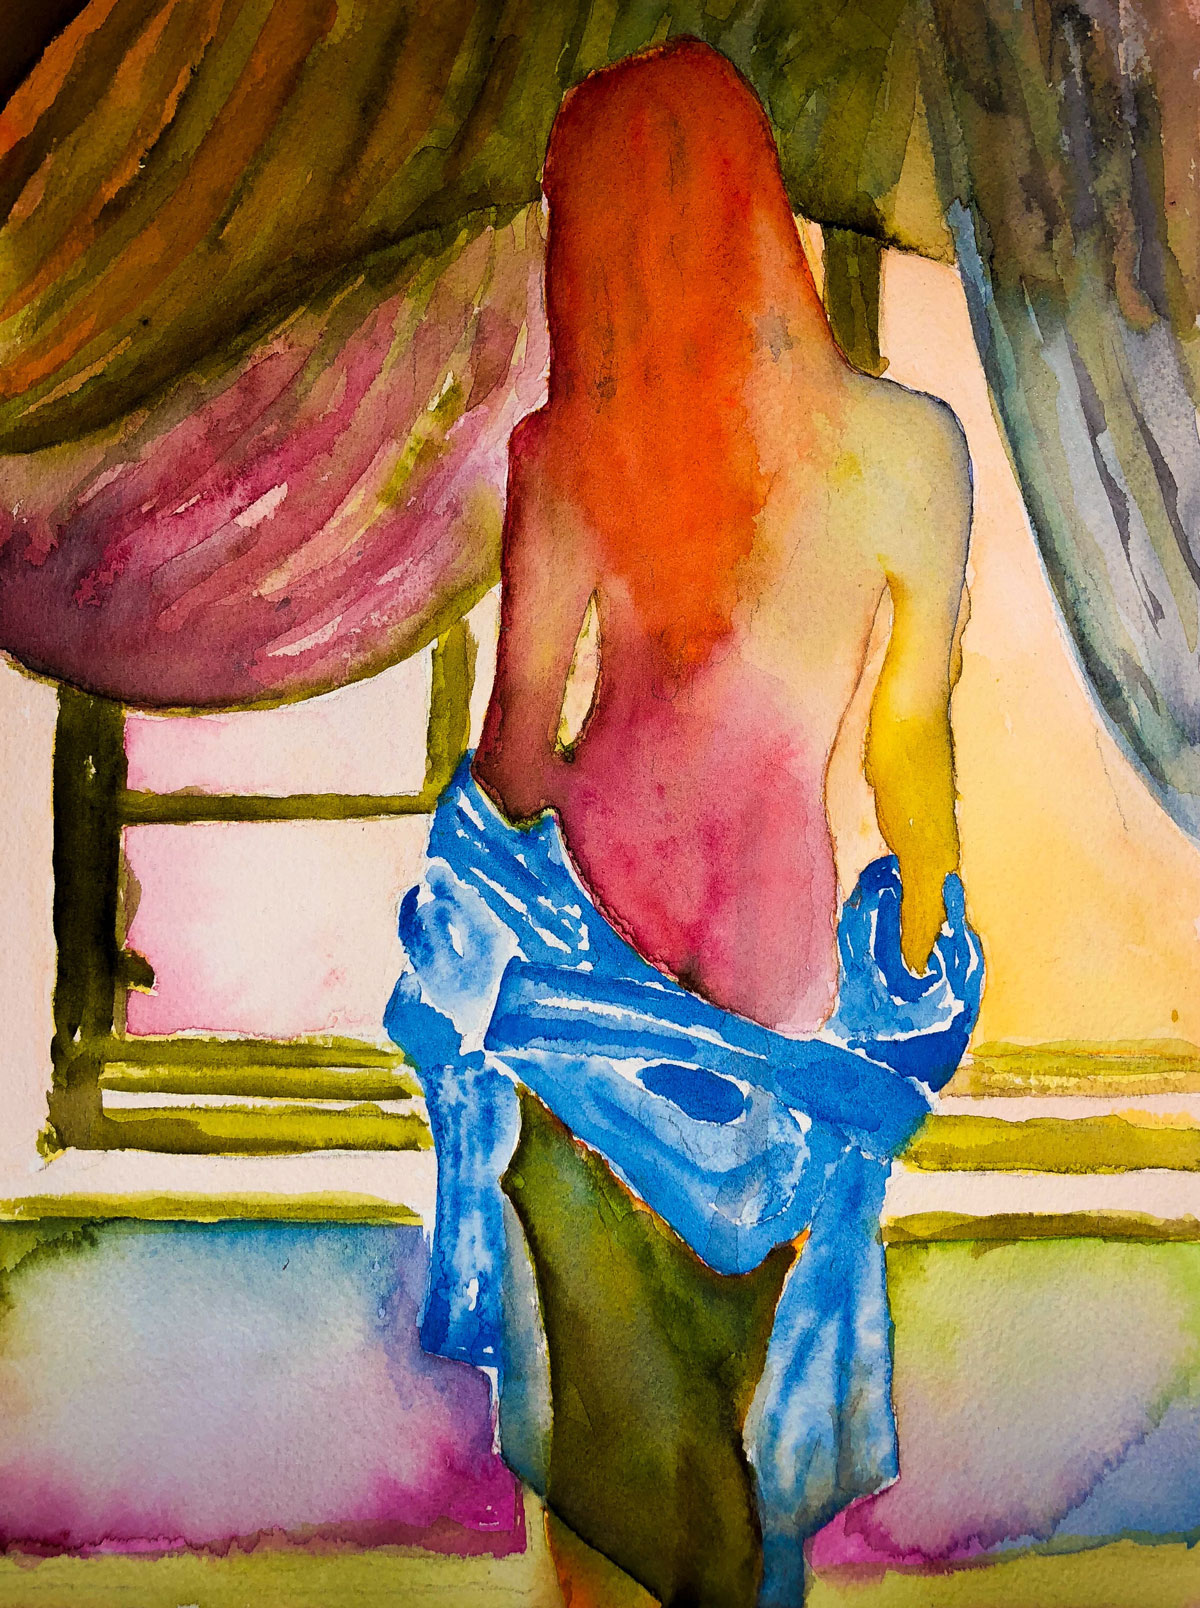 Watercolor woman staring out a window